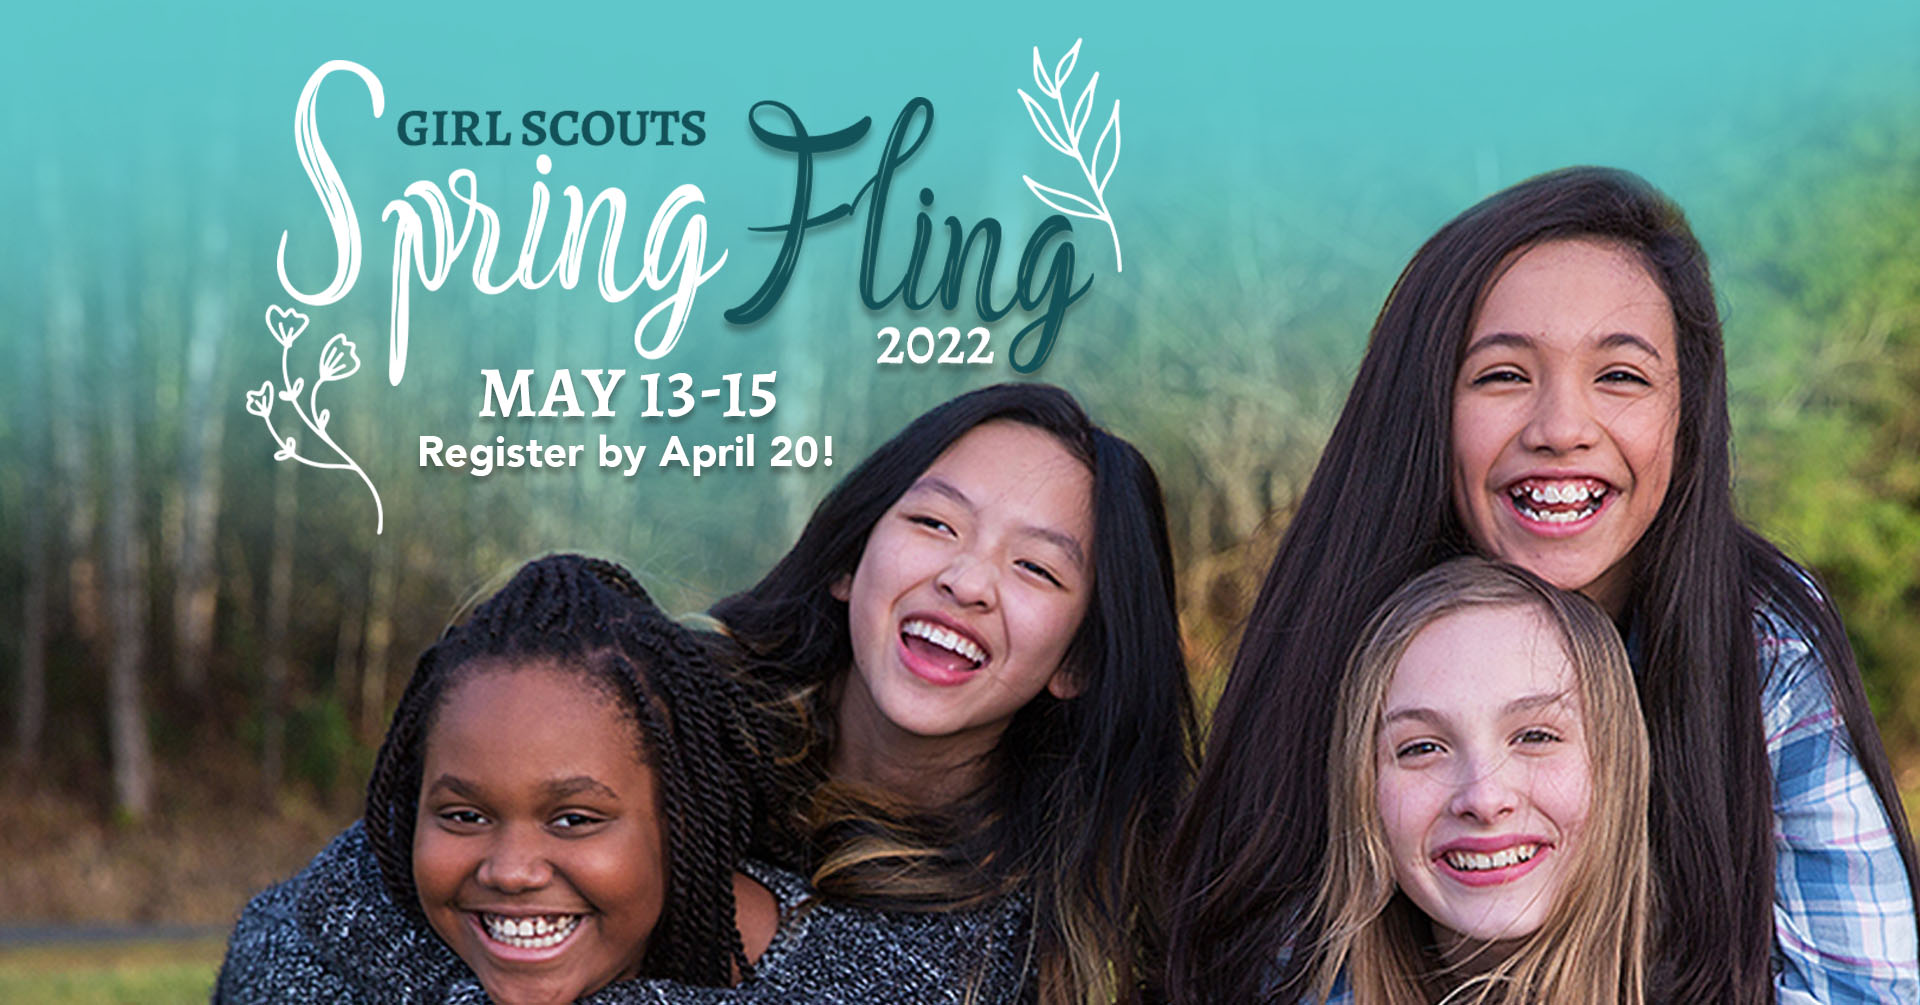 Girl Scouts Spring Fling at Old Forge Camping Resort